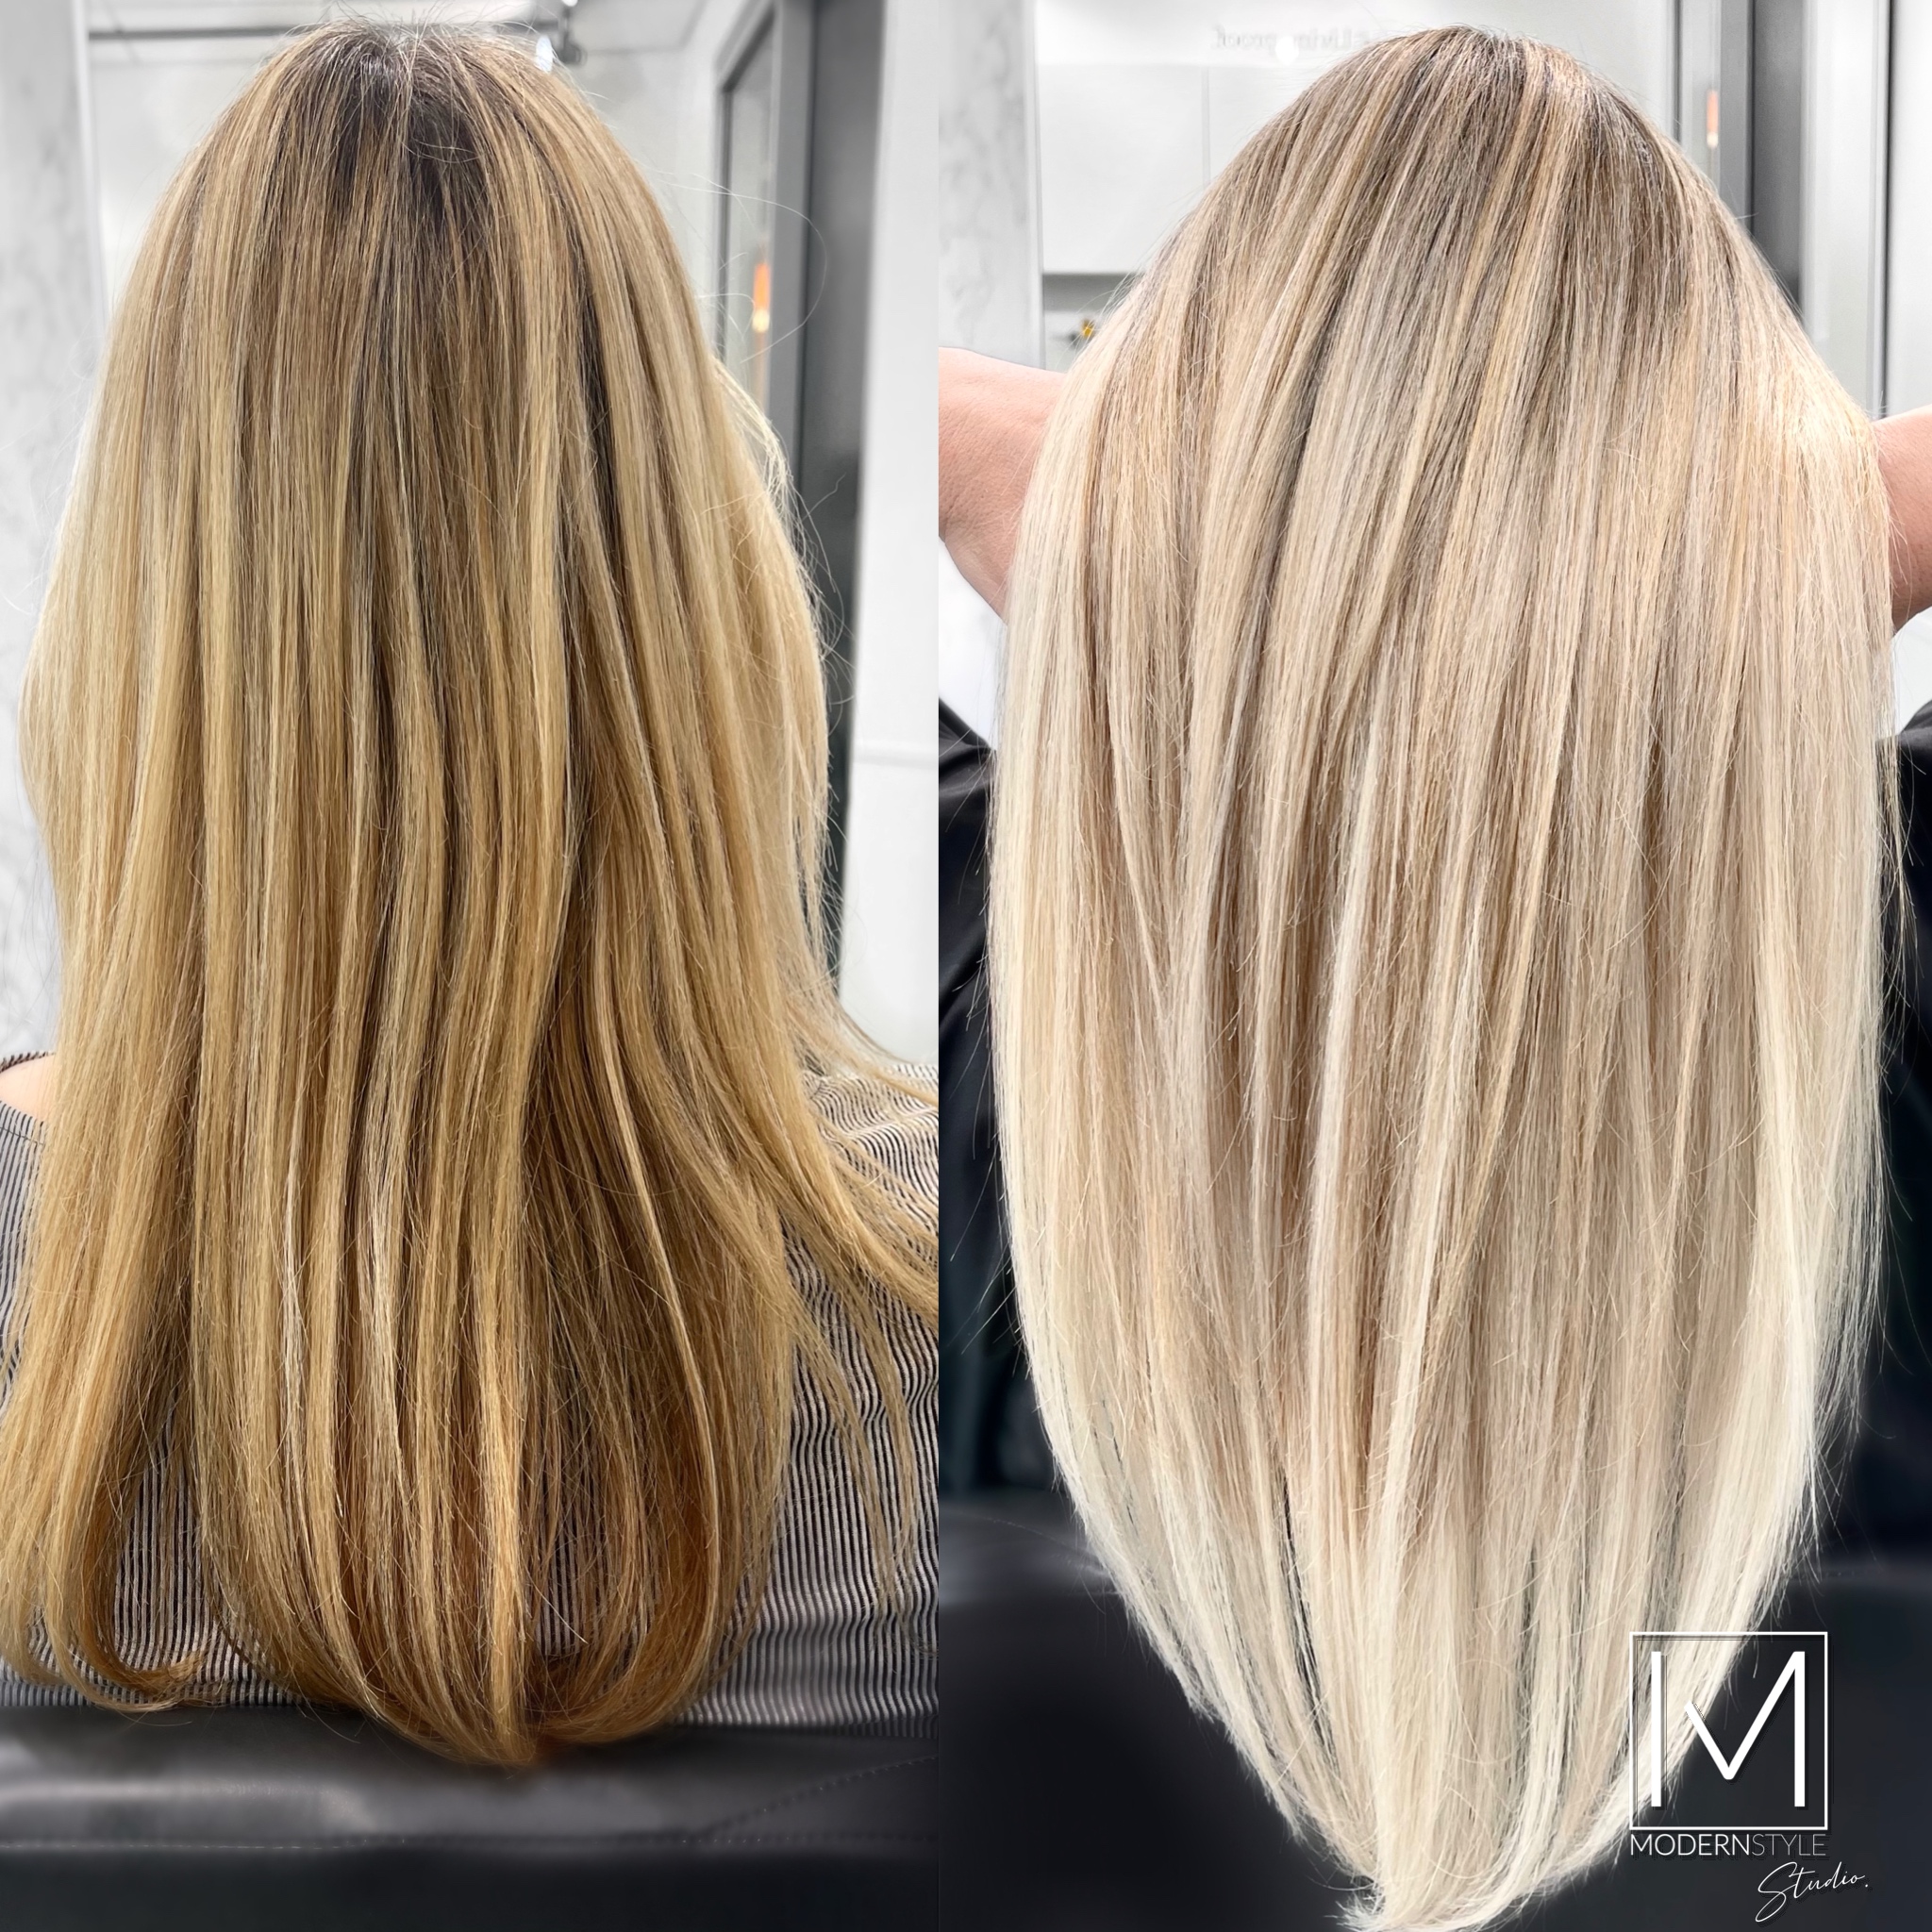 Hair extensions near me, hand tied extensions, beaded weft extensions, micro links extensions, bellami hair extensions, hair extension specialist near me, blonde specialist near me